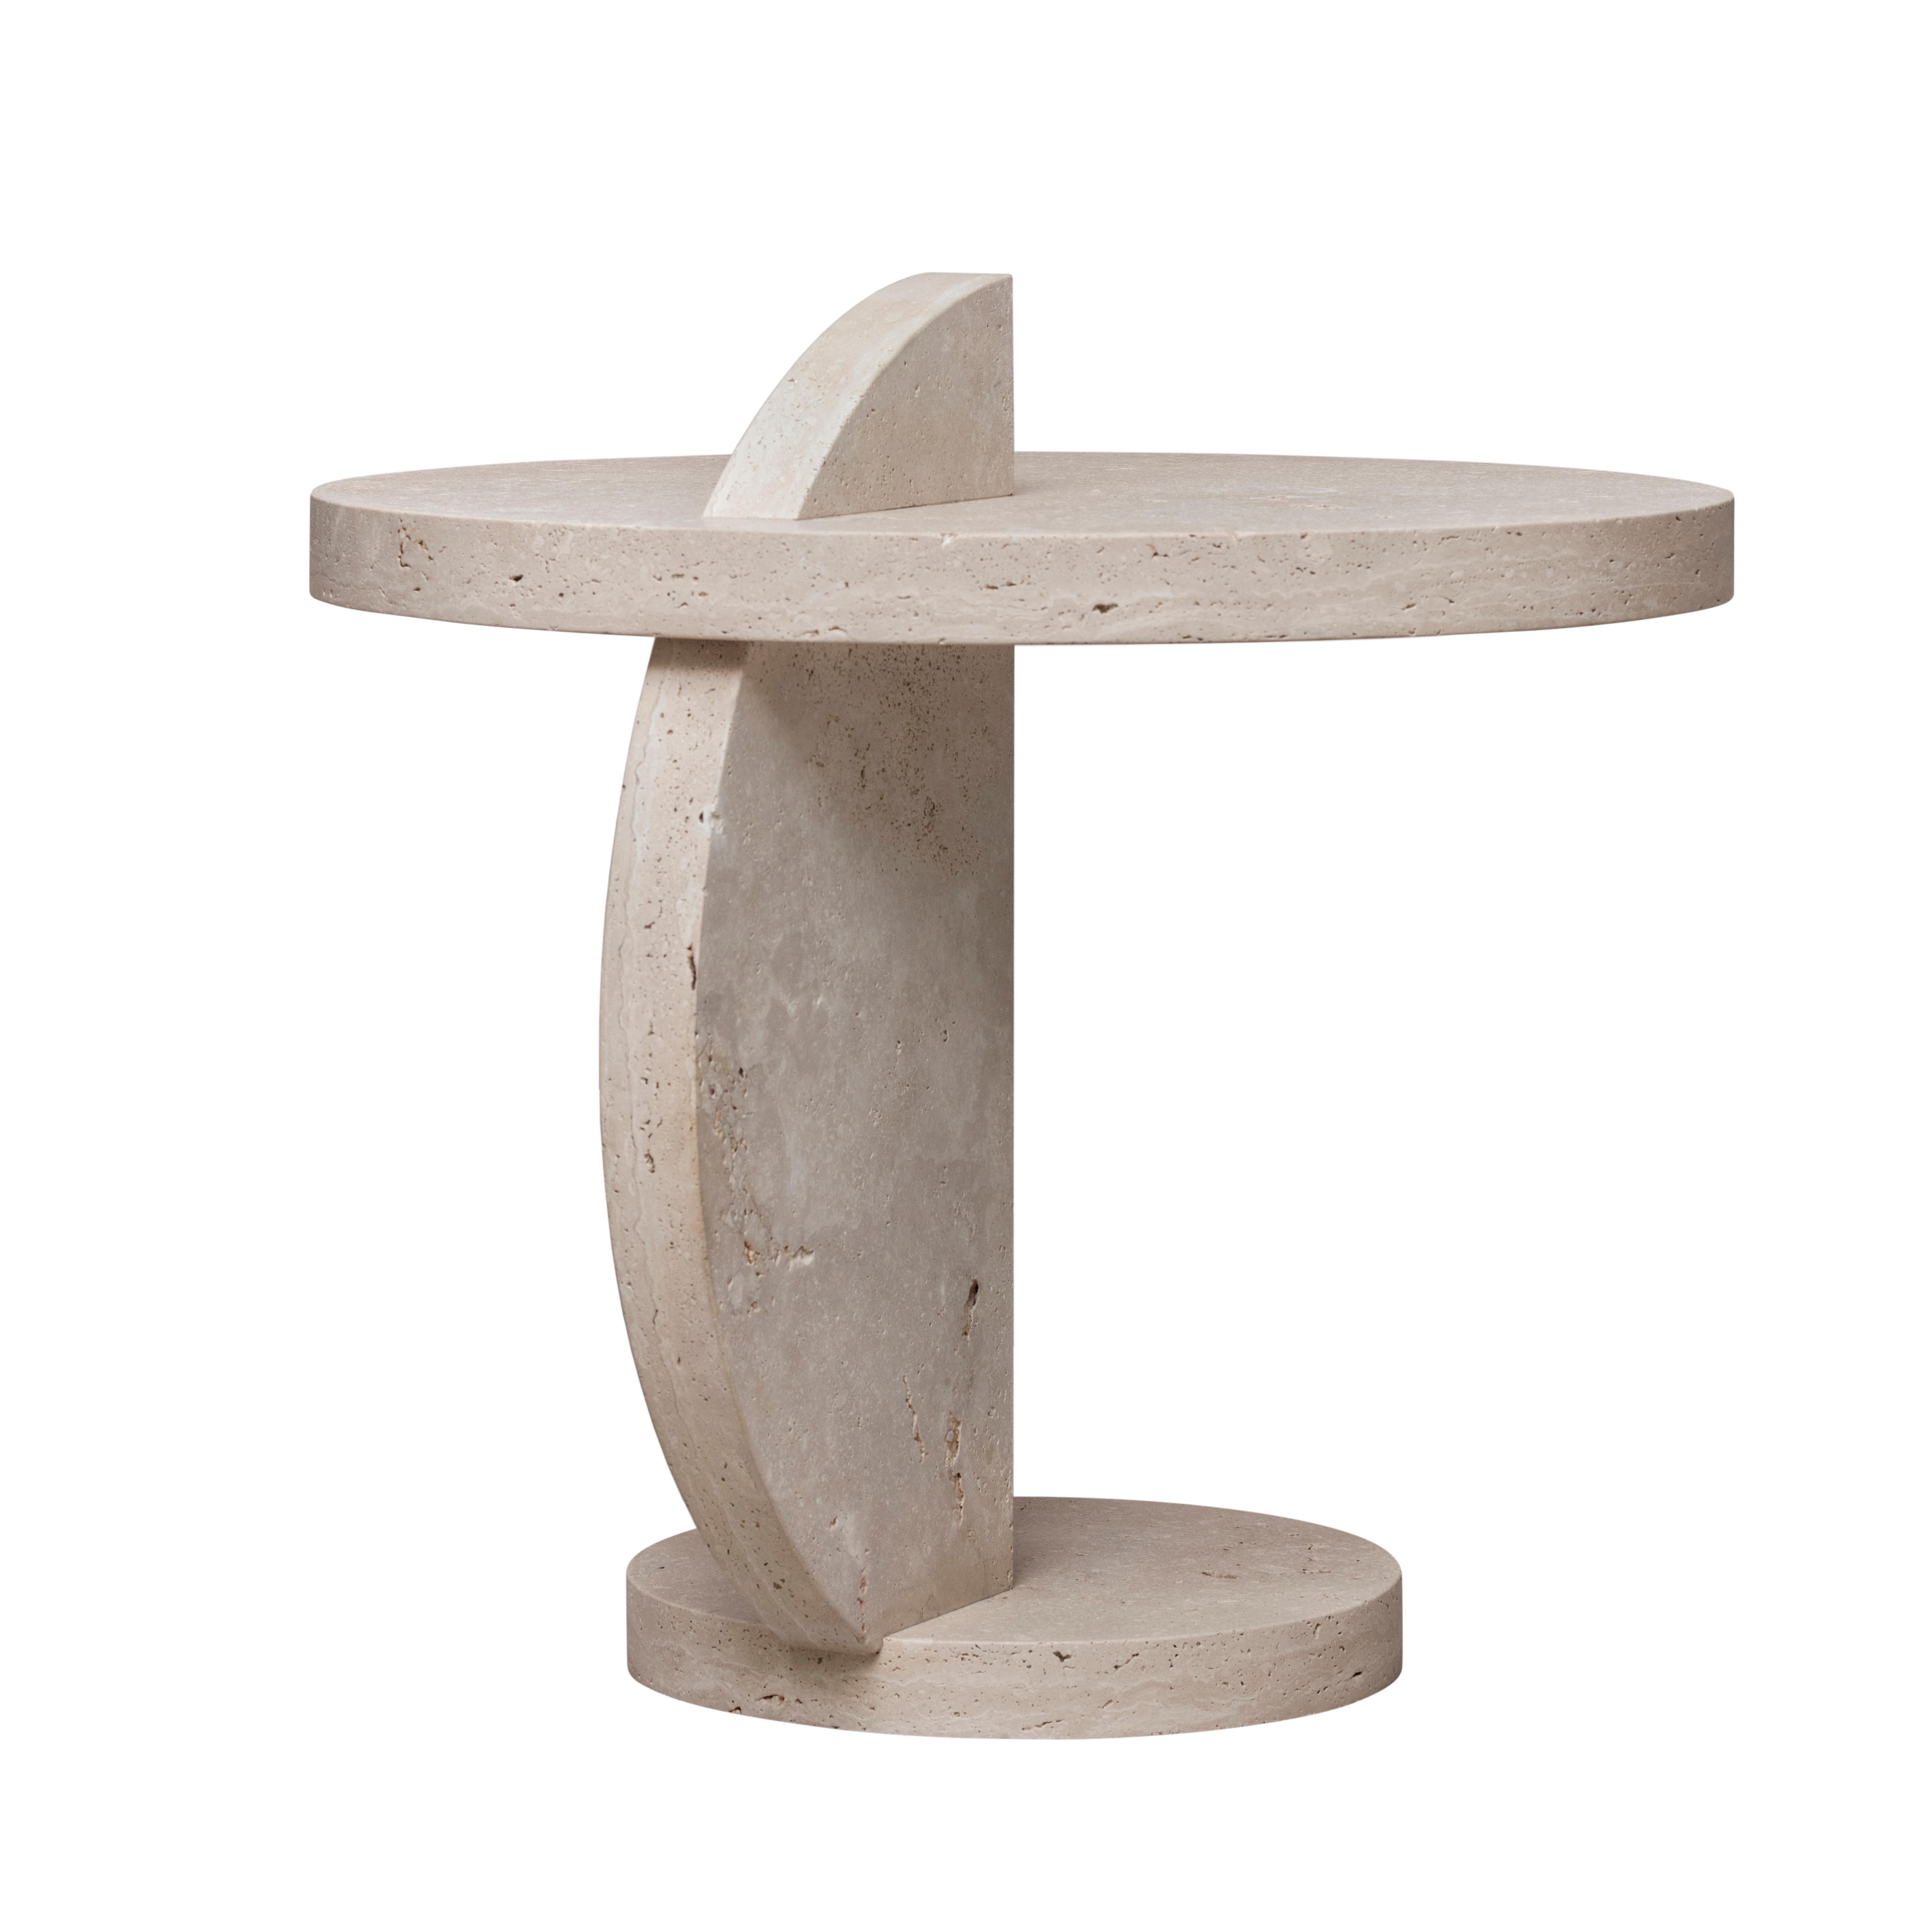 The travertine lounge table is the perfect statement piece in almost any interior. The strong geometry of the form makes a graphic statement while the beauty and tranquil quality of the travertine won’t overwhelm. The height of the table is perfect